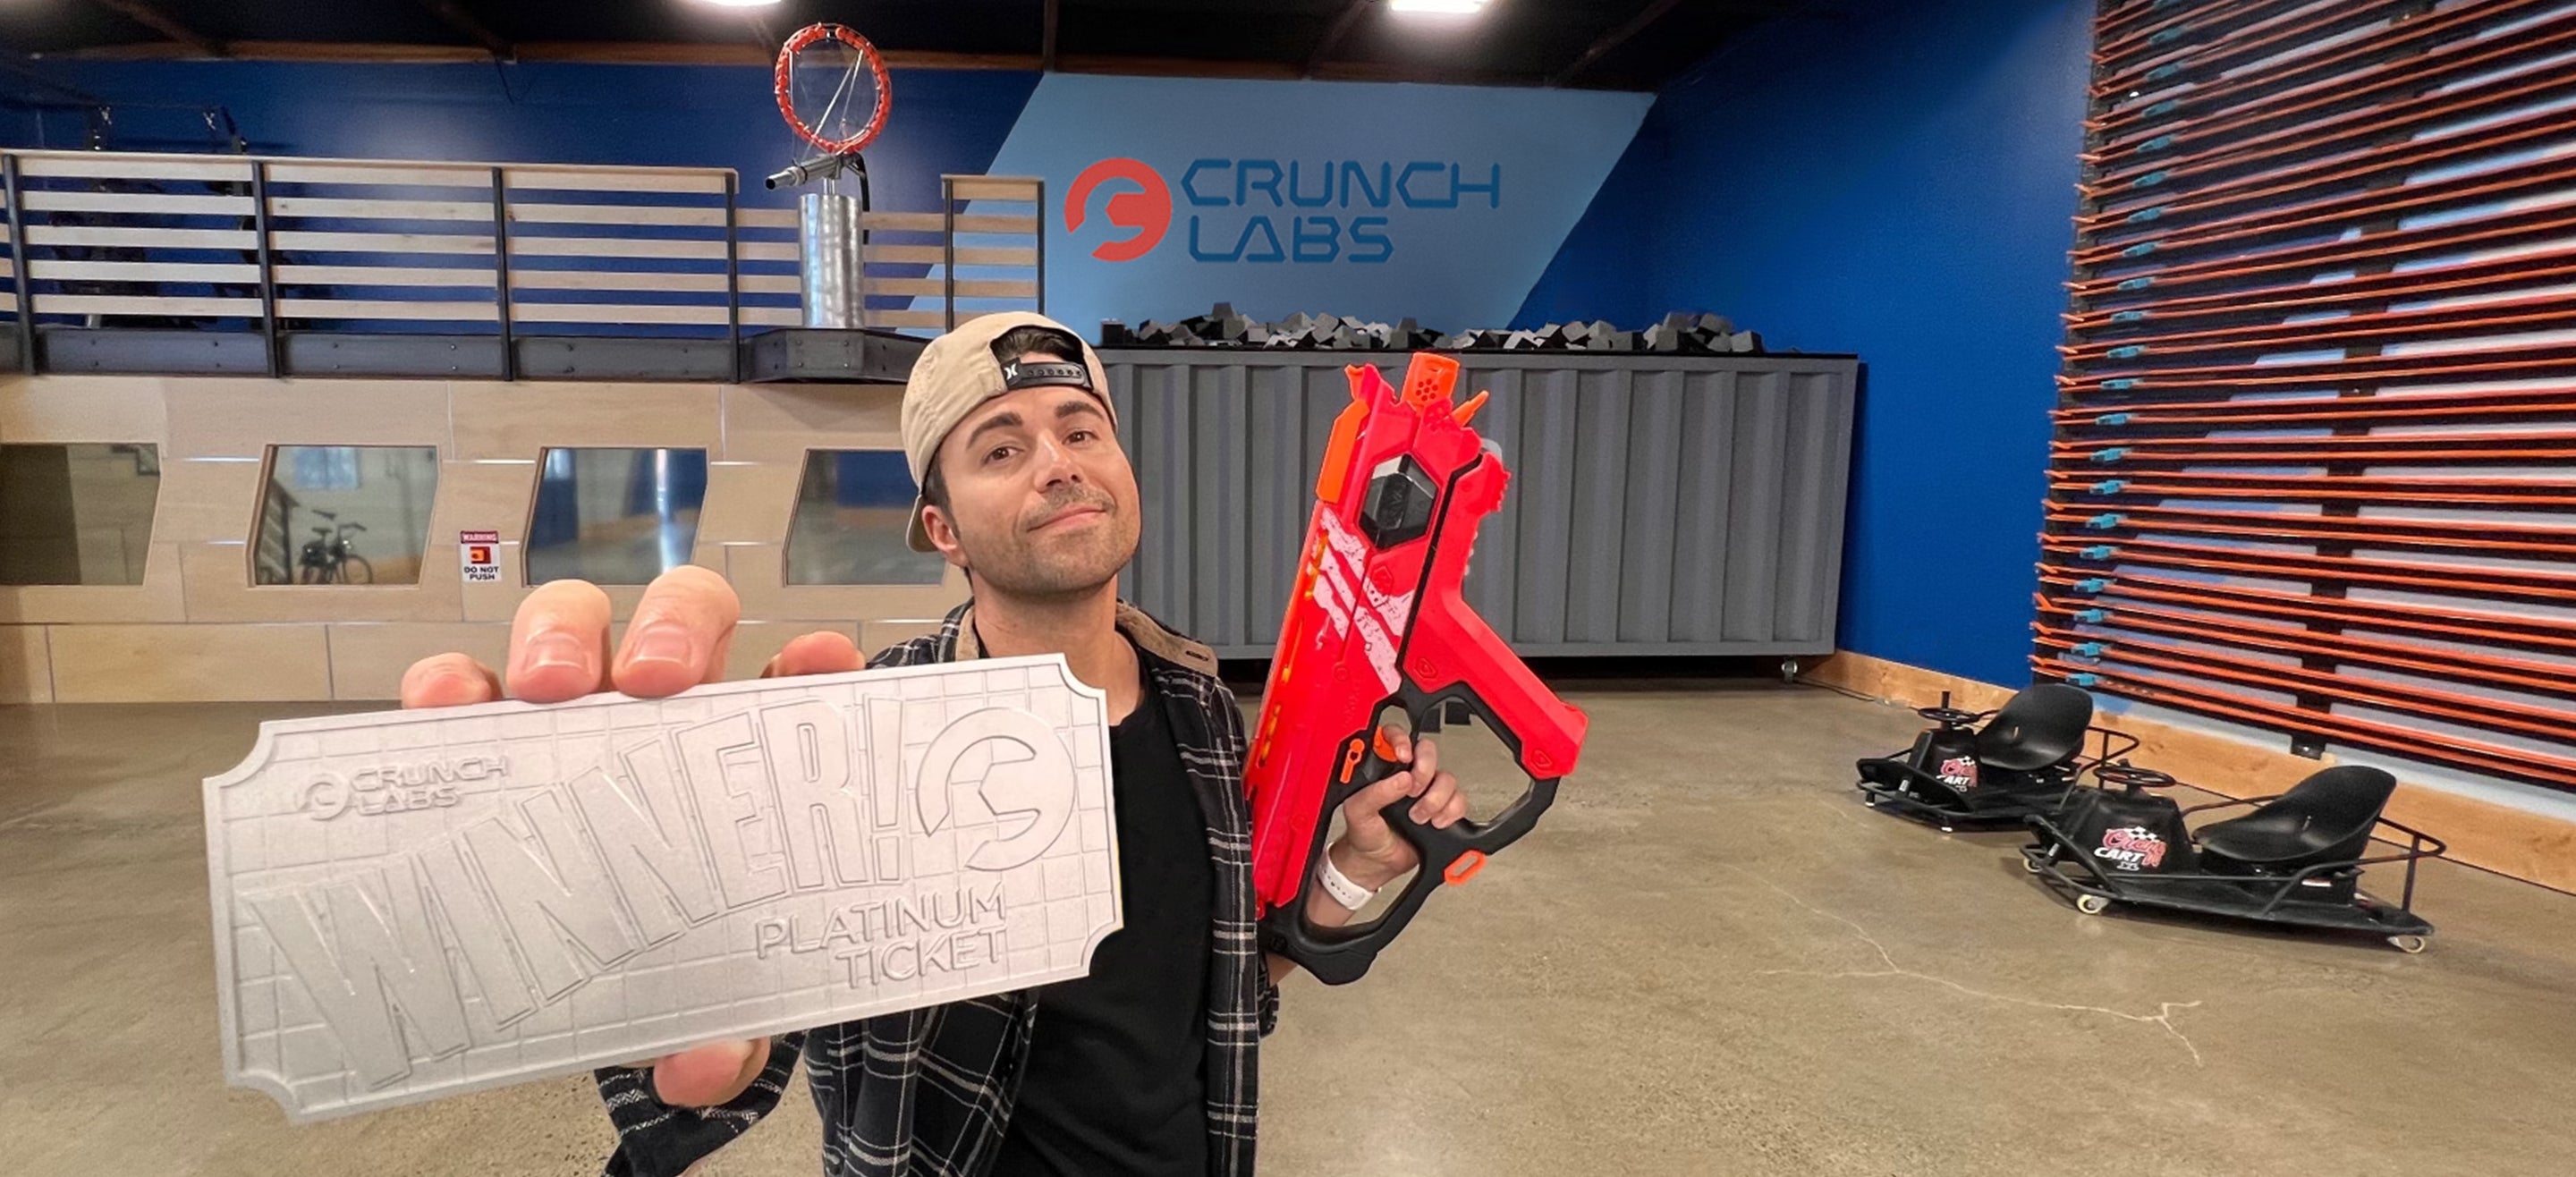 Photo of Mark Rober at CrunchLabs holding a Platinum Ticket